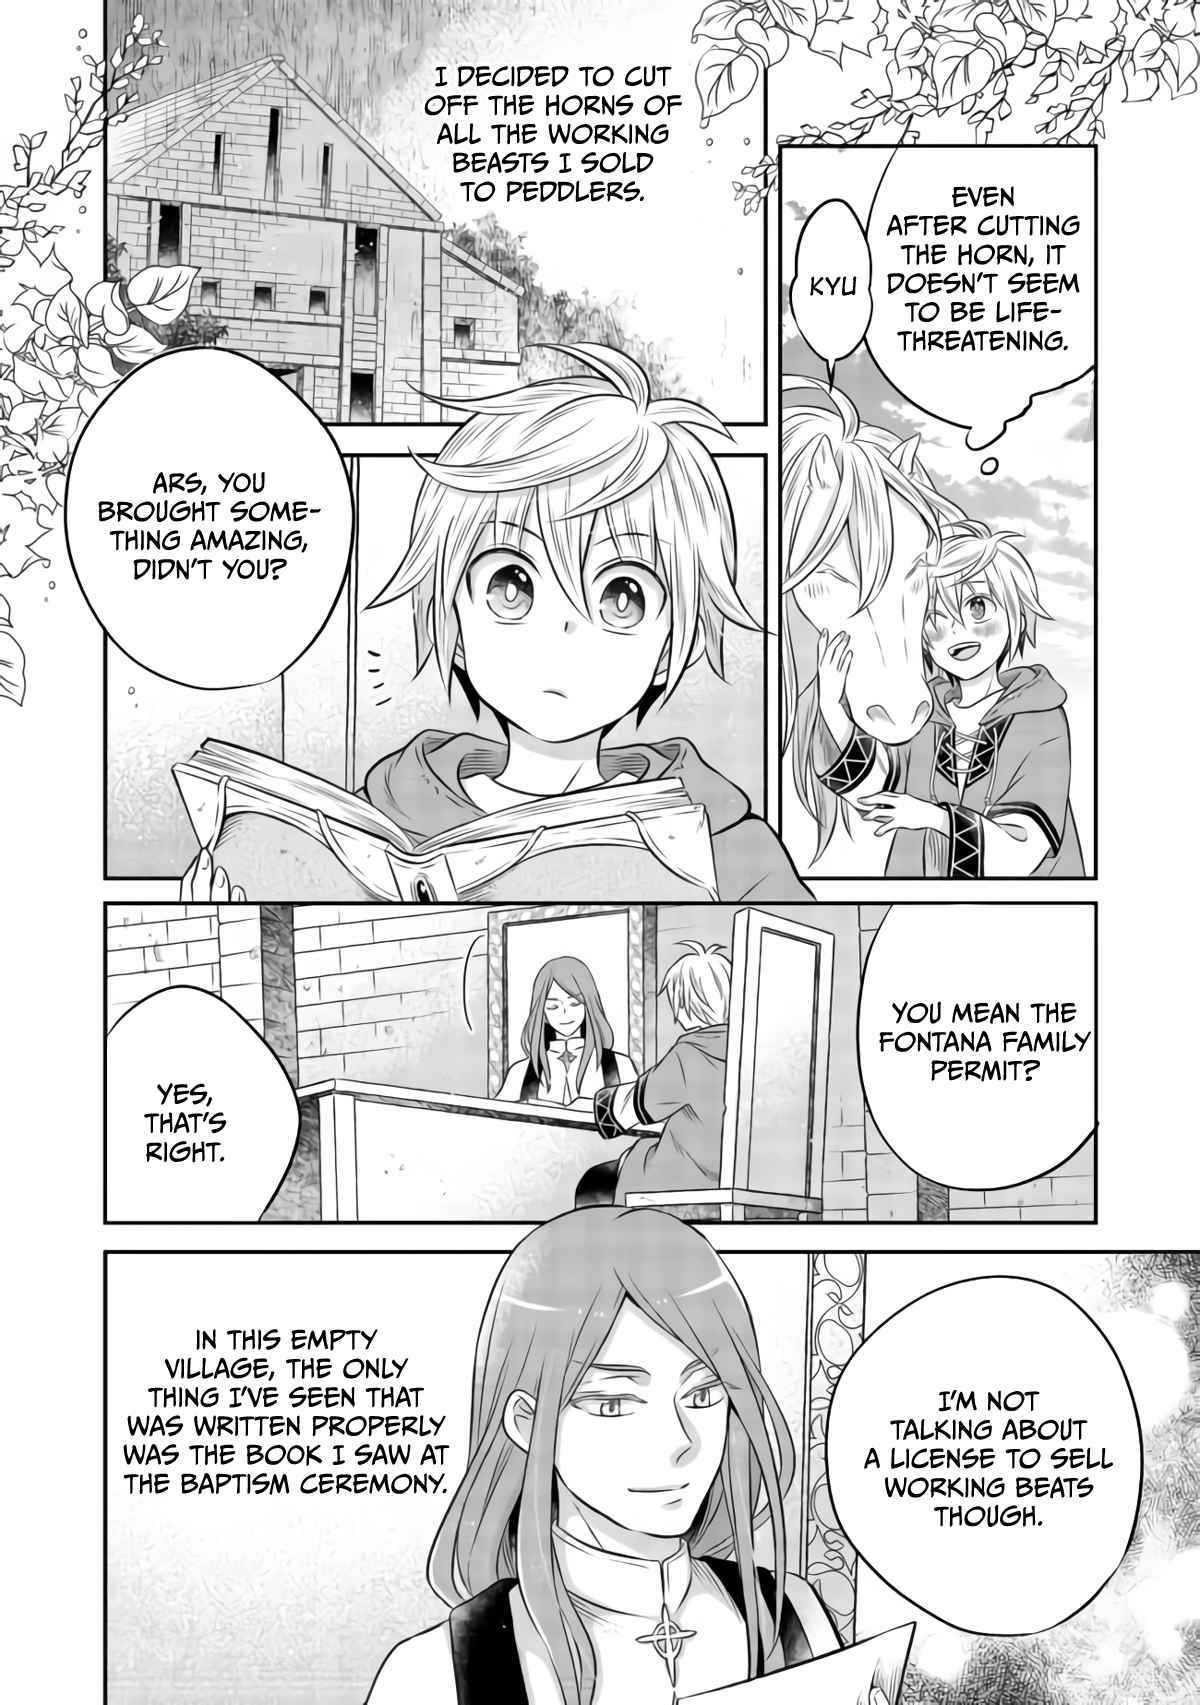 I Was Reincarnated As A Poor Farmer In A Different World, So I Decided To Make Bricks To Build A Castle Alternative : Isekai No - 7.1 page 9-25f34aff